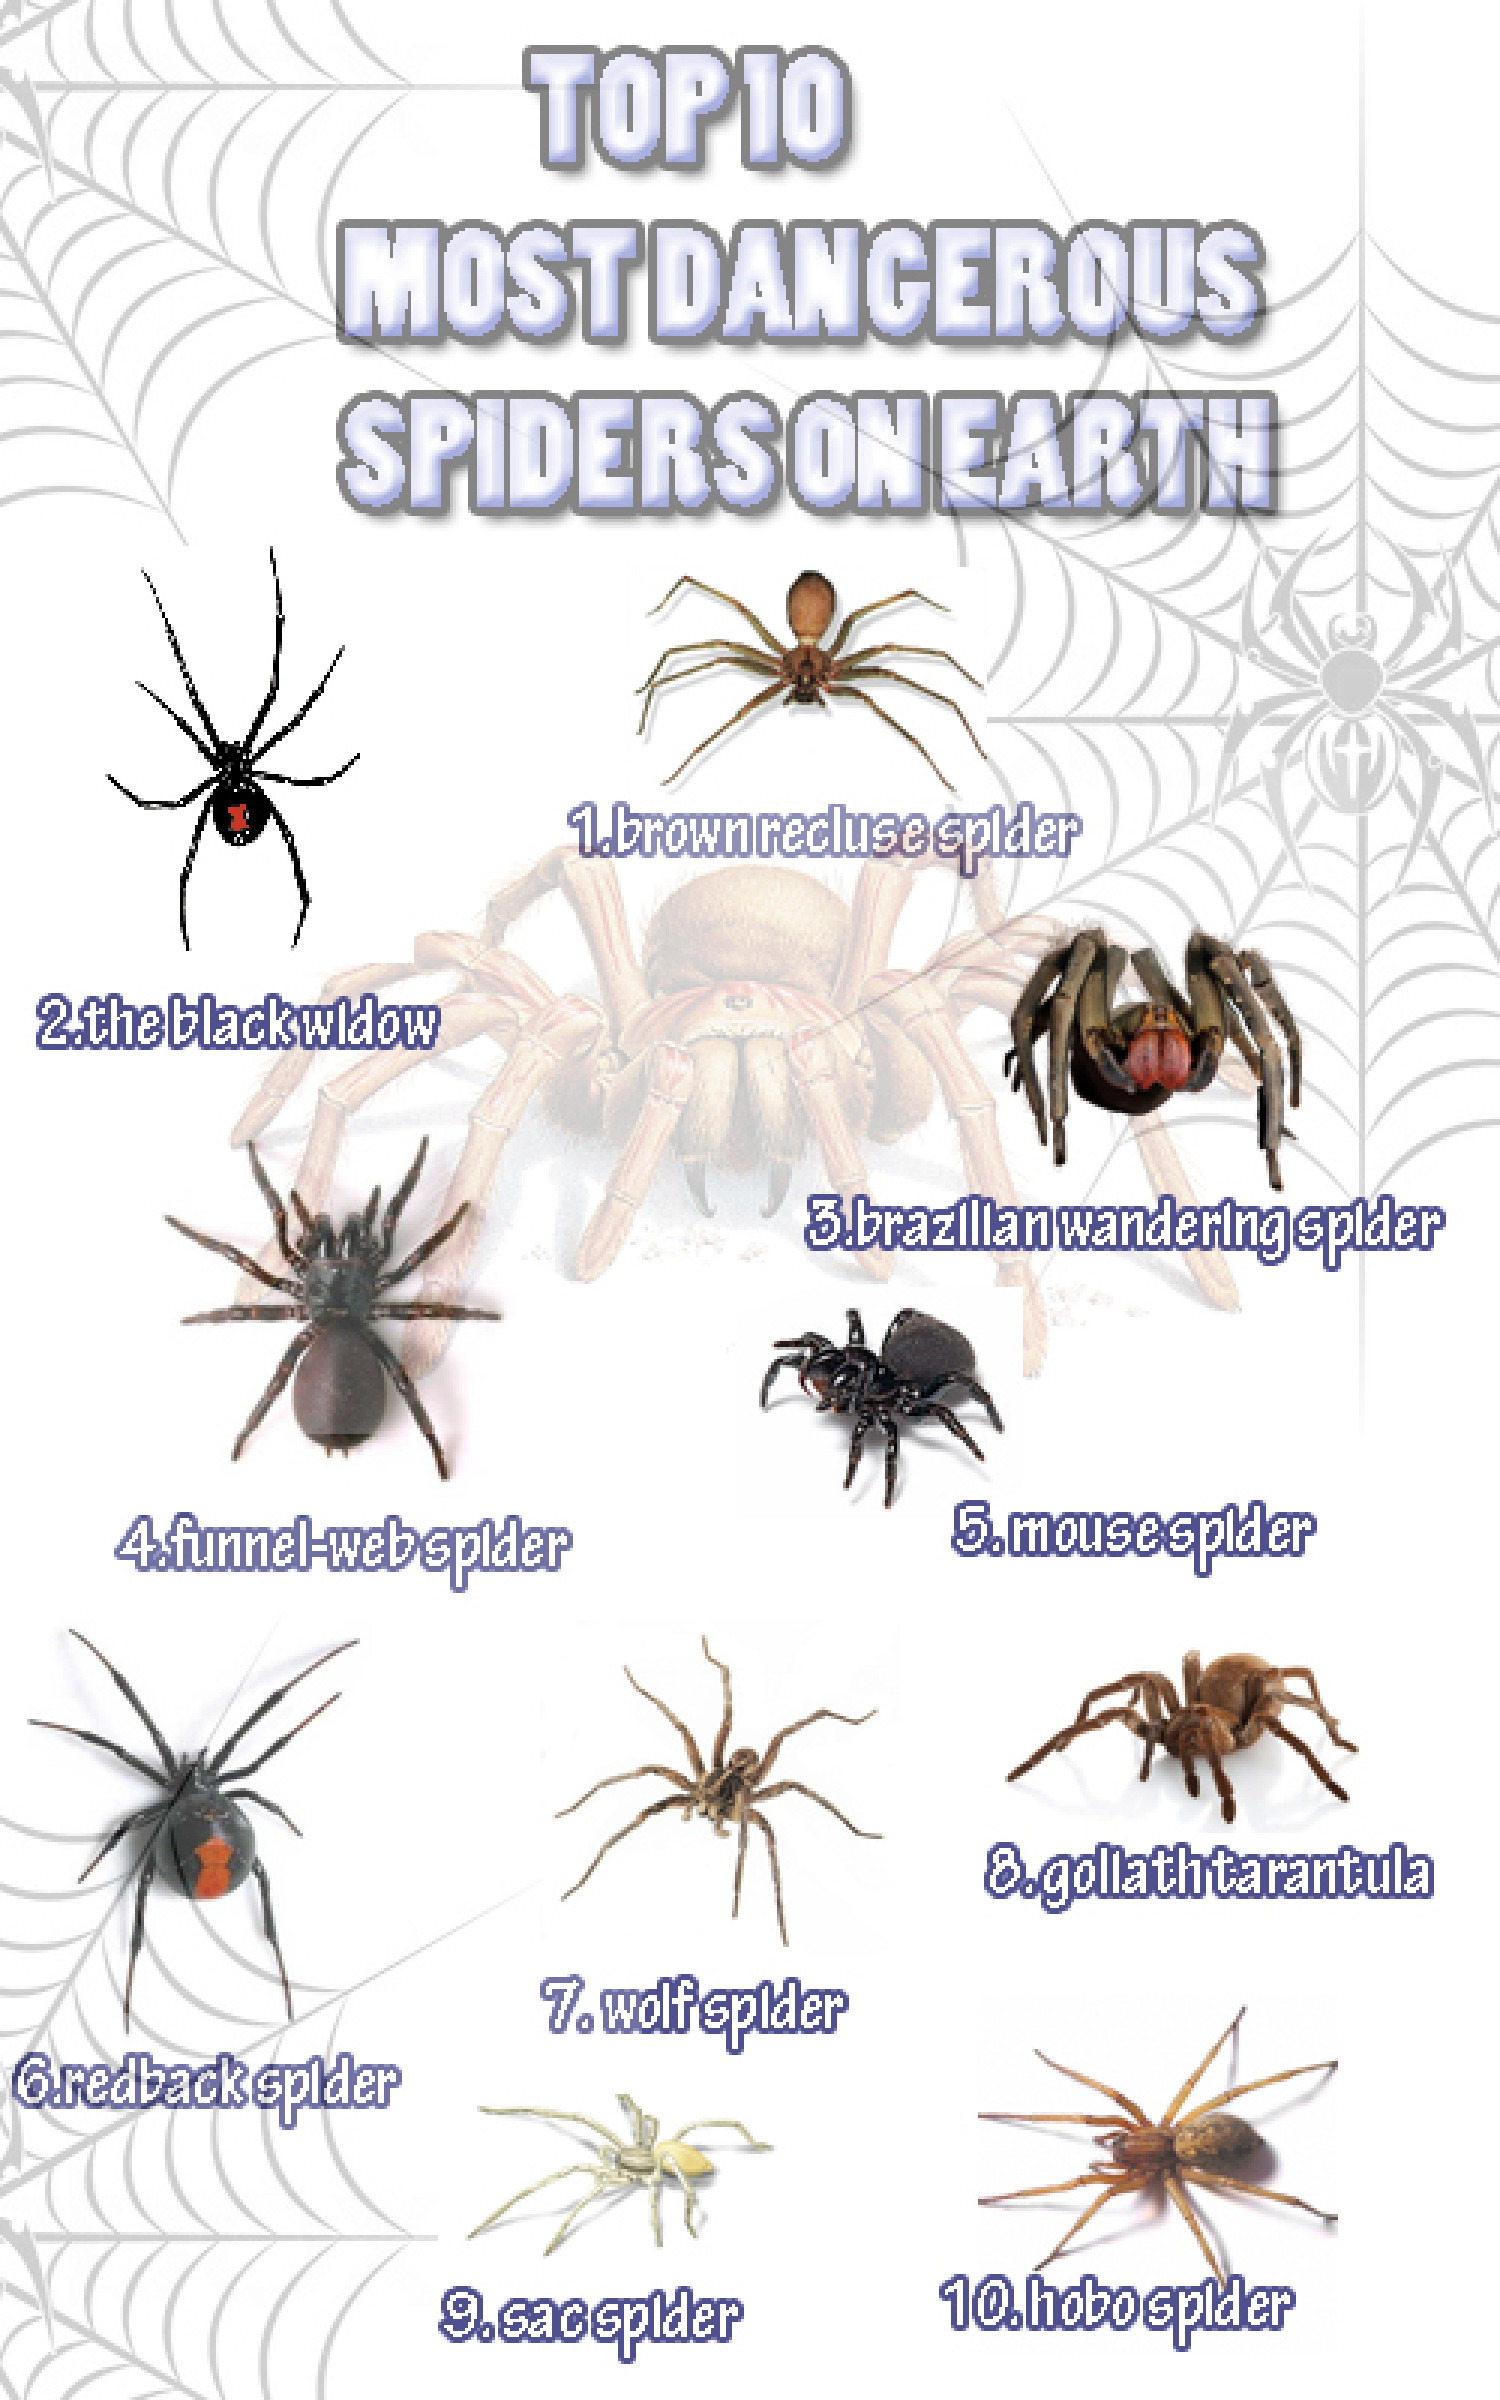 What are the top 10 deadliest spider?